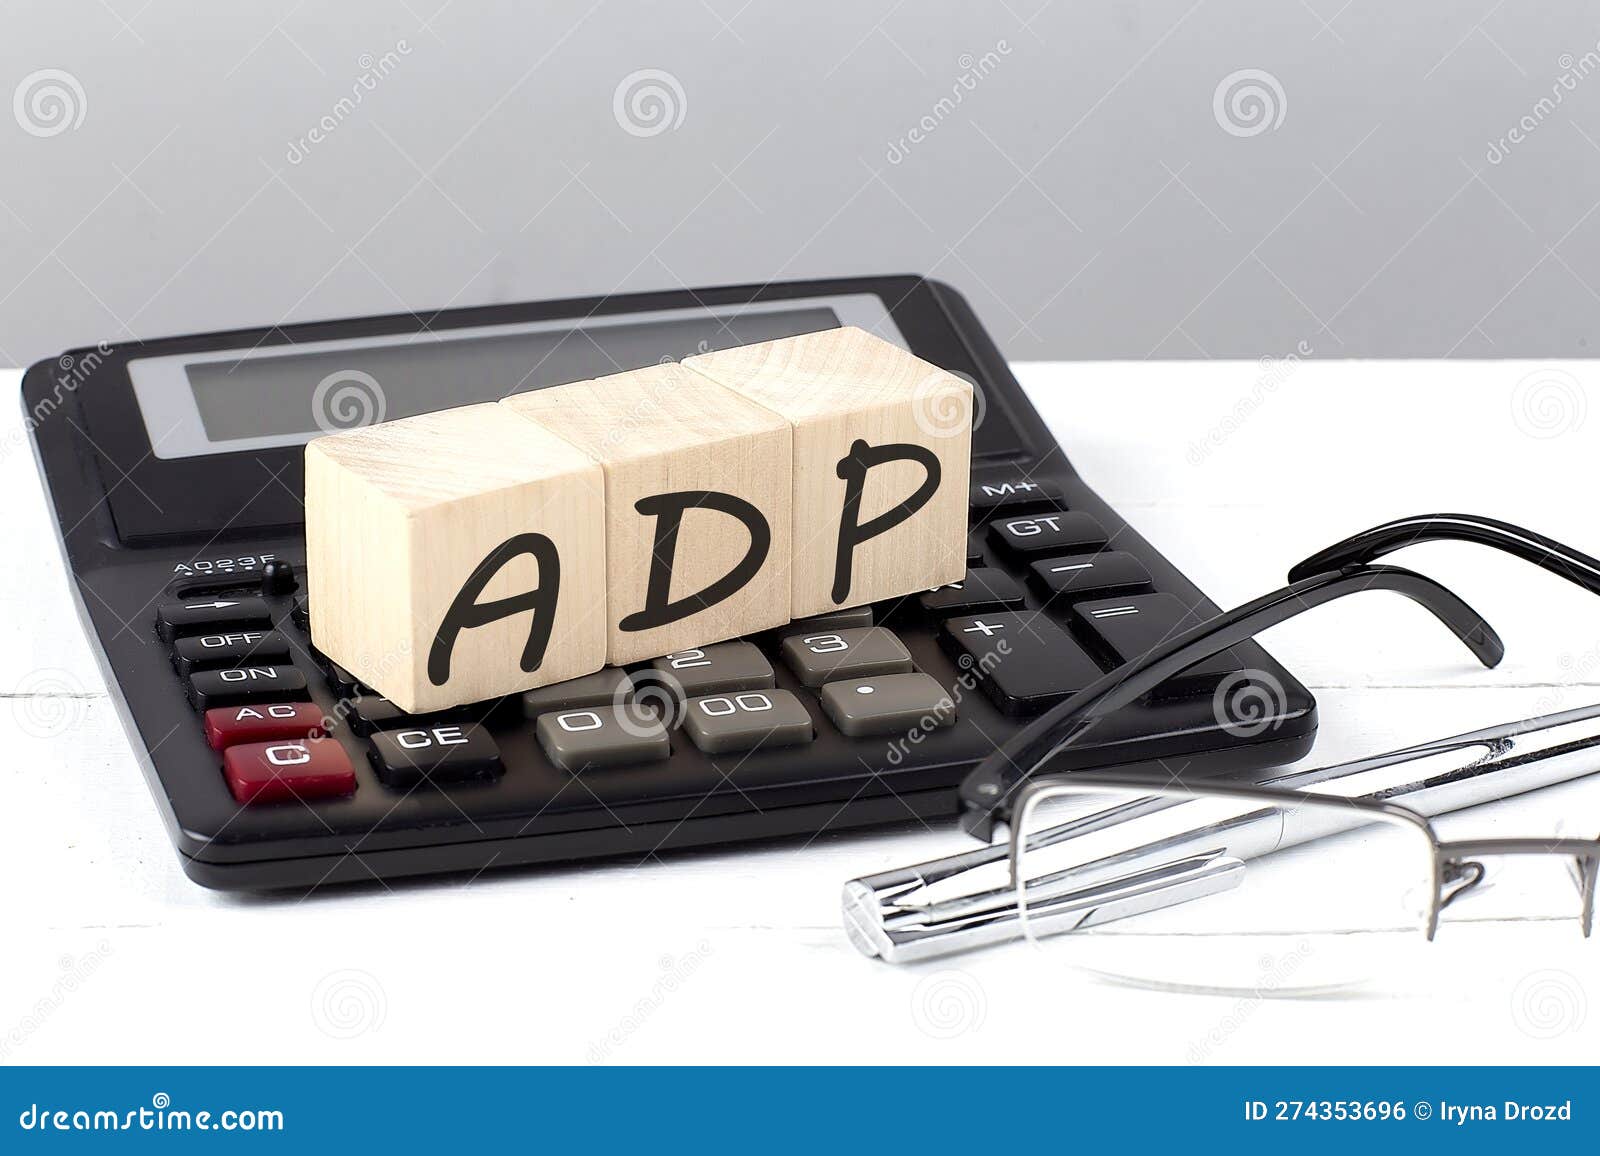 163 Adp Stock Photos - Free & Royalty-Free Stock Photos from Dreamstime